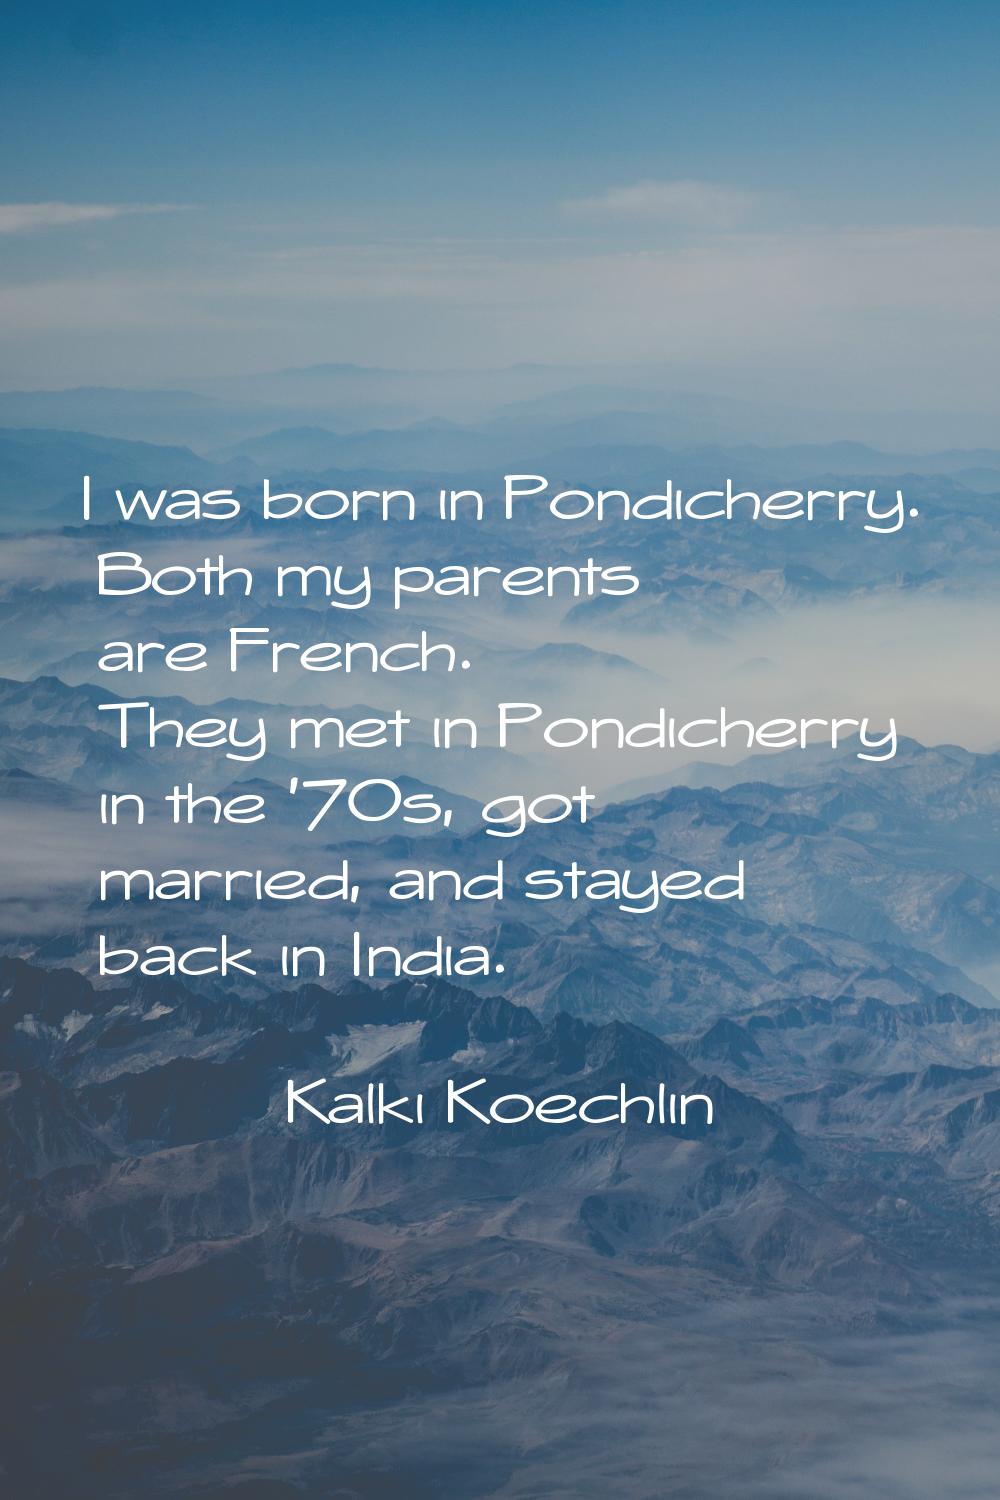 I was born in Pondicherry. Both my parents are French. They met in Pondicherry in the '70s, got mar